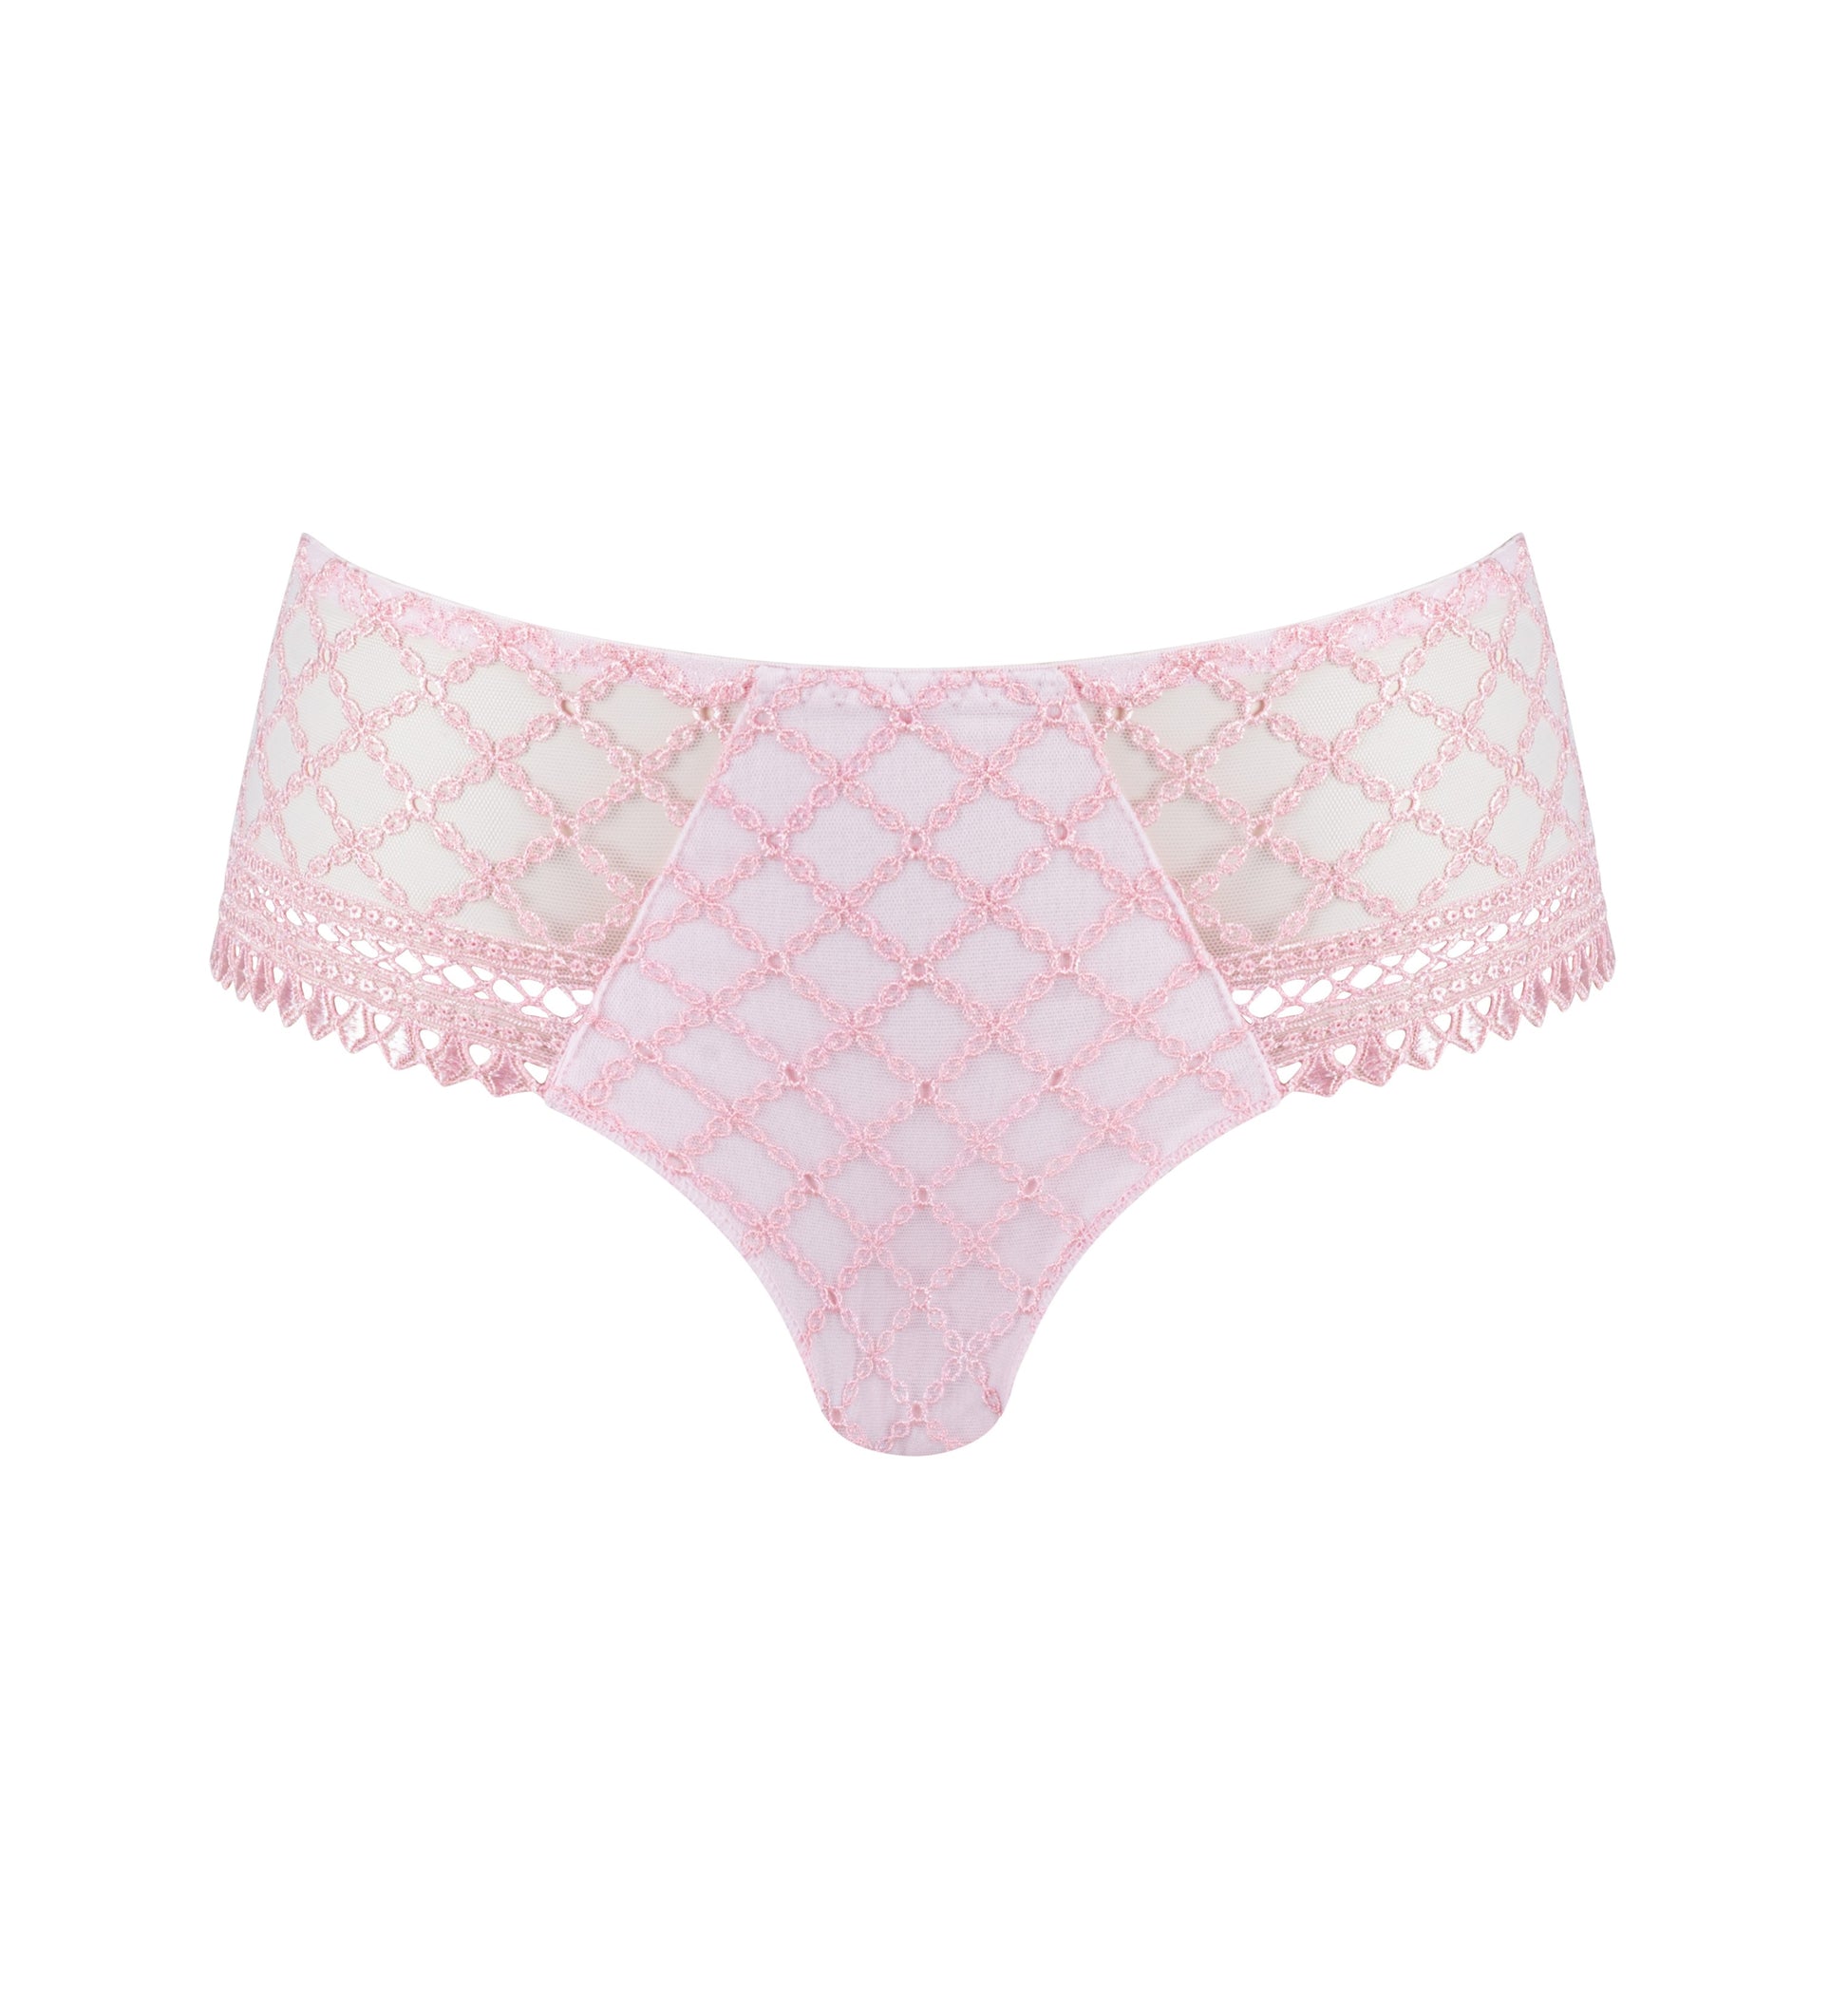 Louisa Bracq Paco Ultraluxe Embroidery Shorty